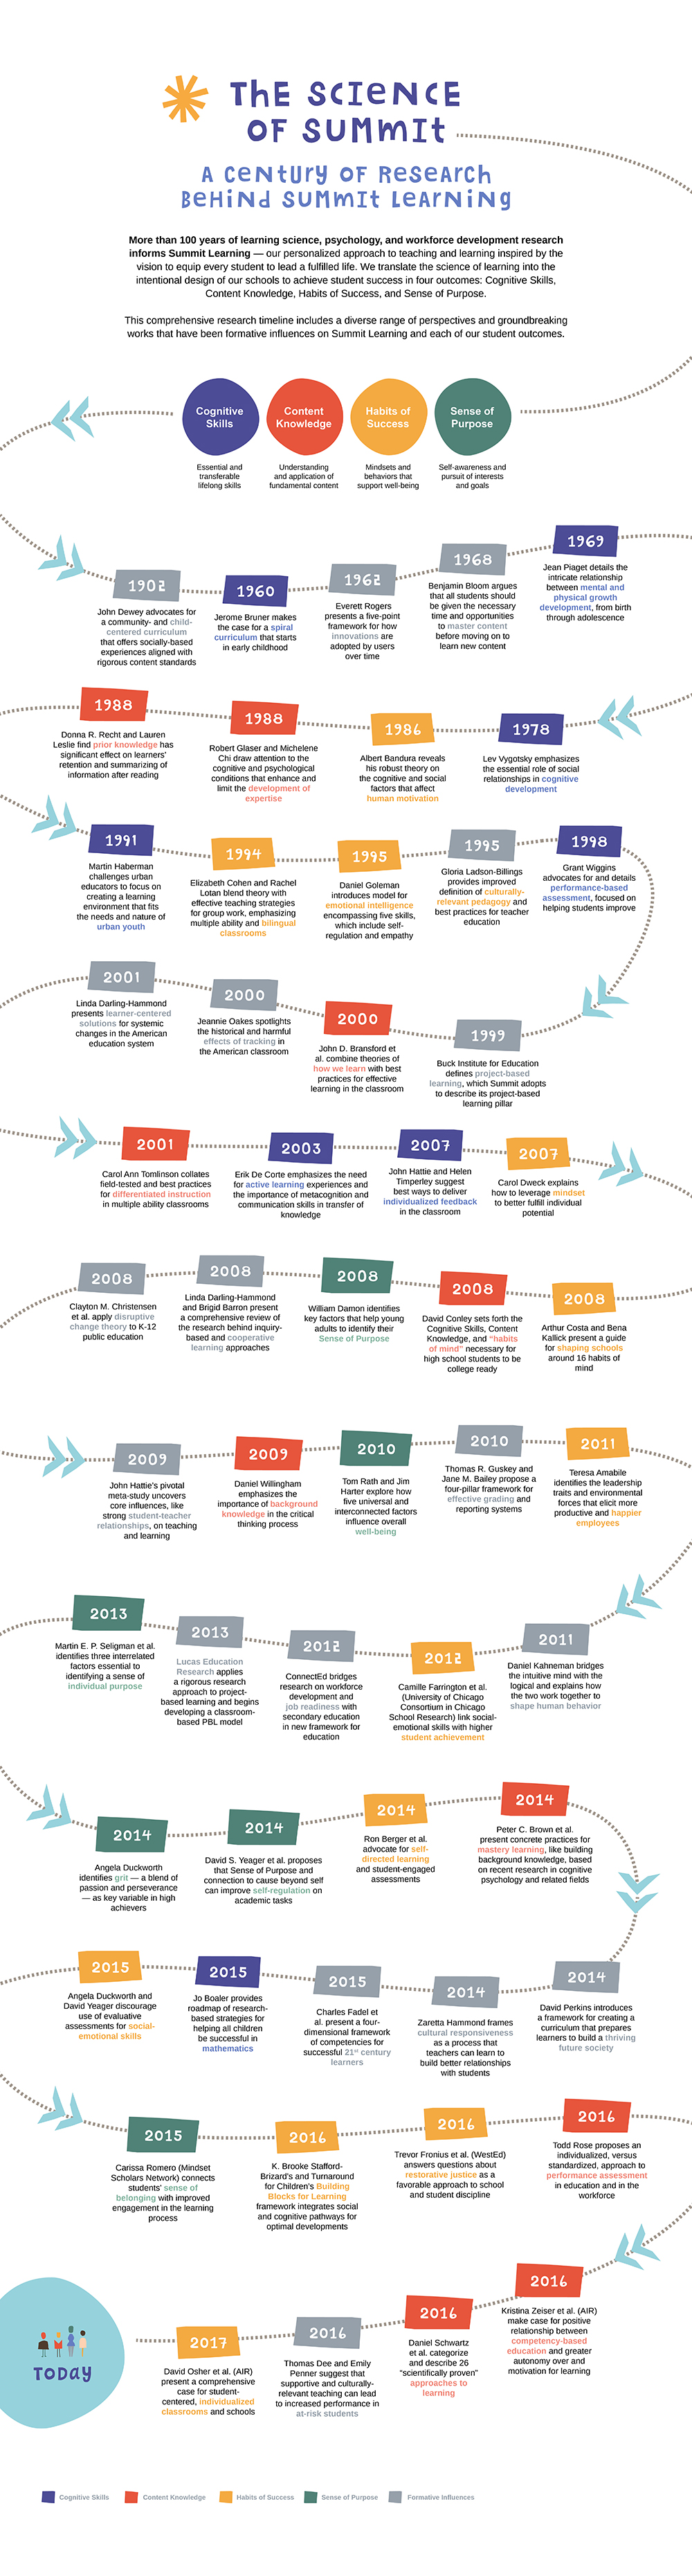 Summit Learning 100 Years of Research Timeline